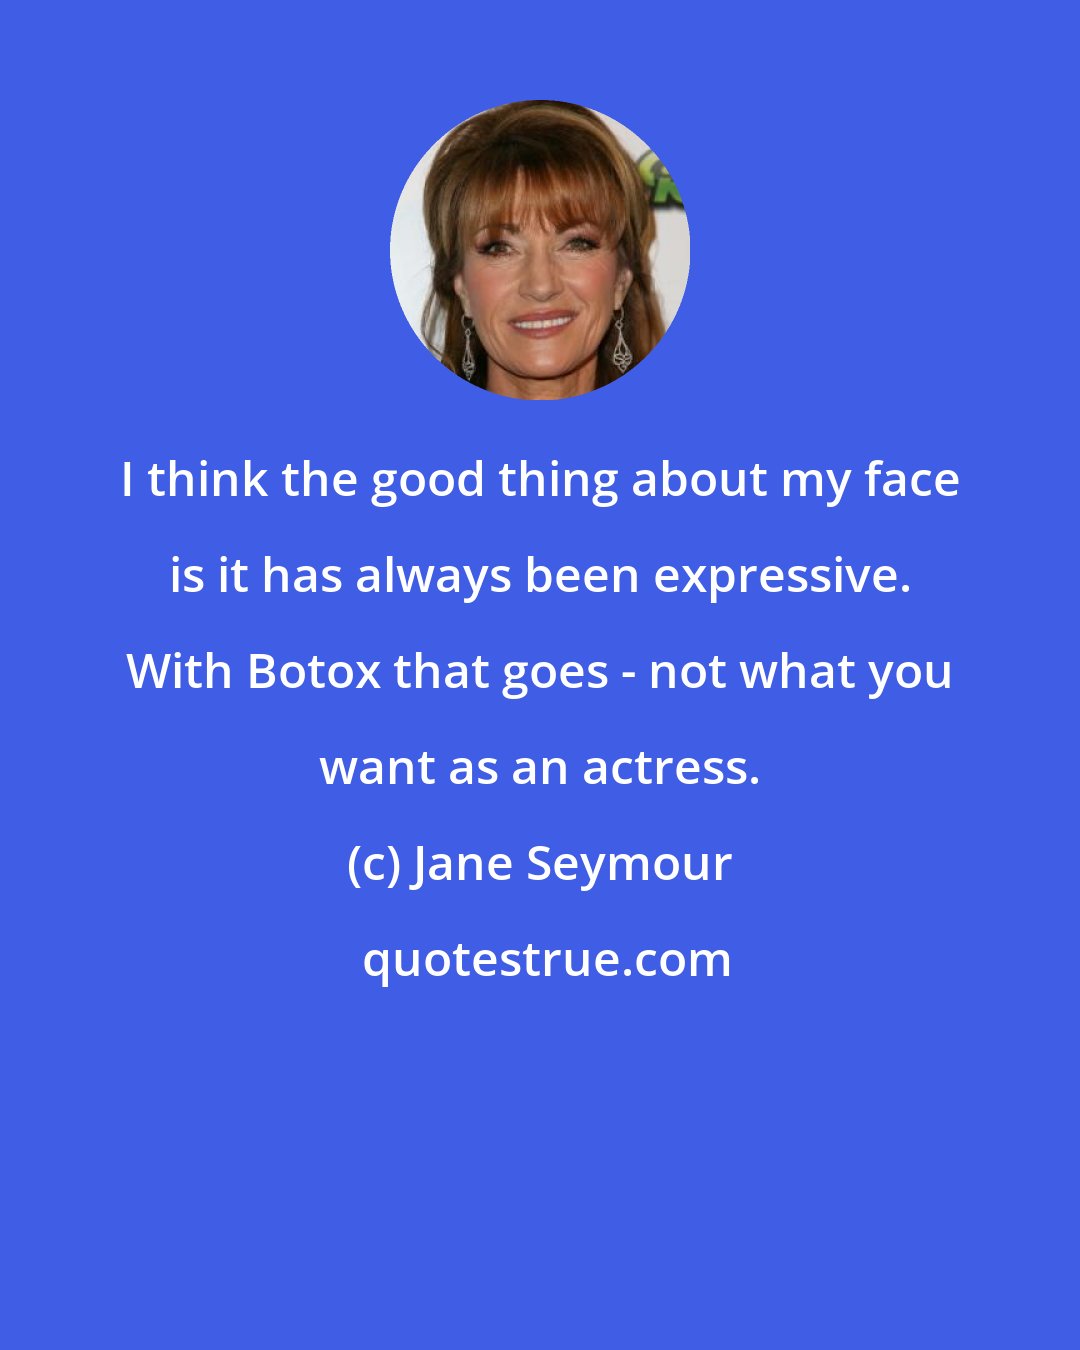 Jane Seymour: I think the good thing about my face is it has always been expressive. With Botox that goes - not what you want as an actress.